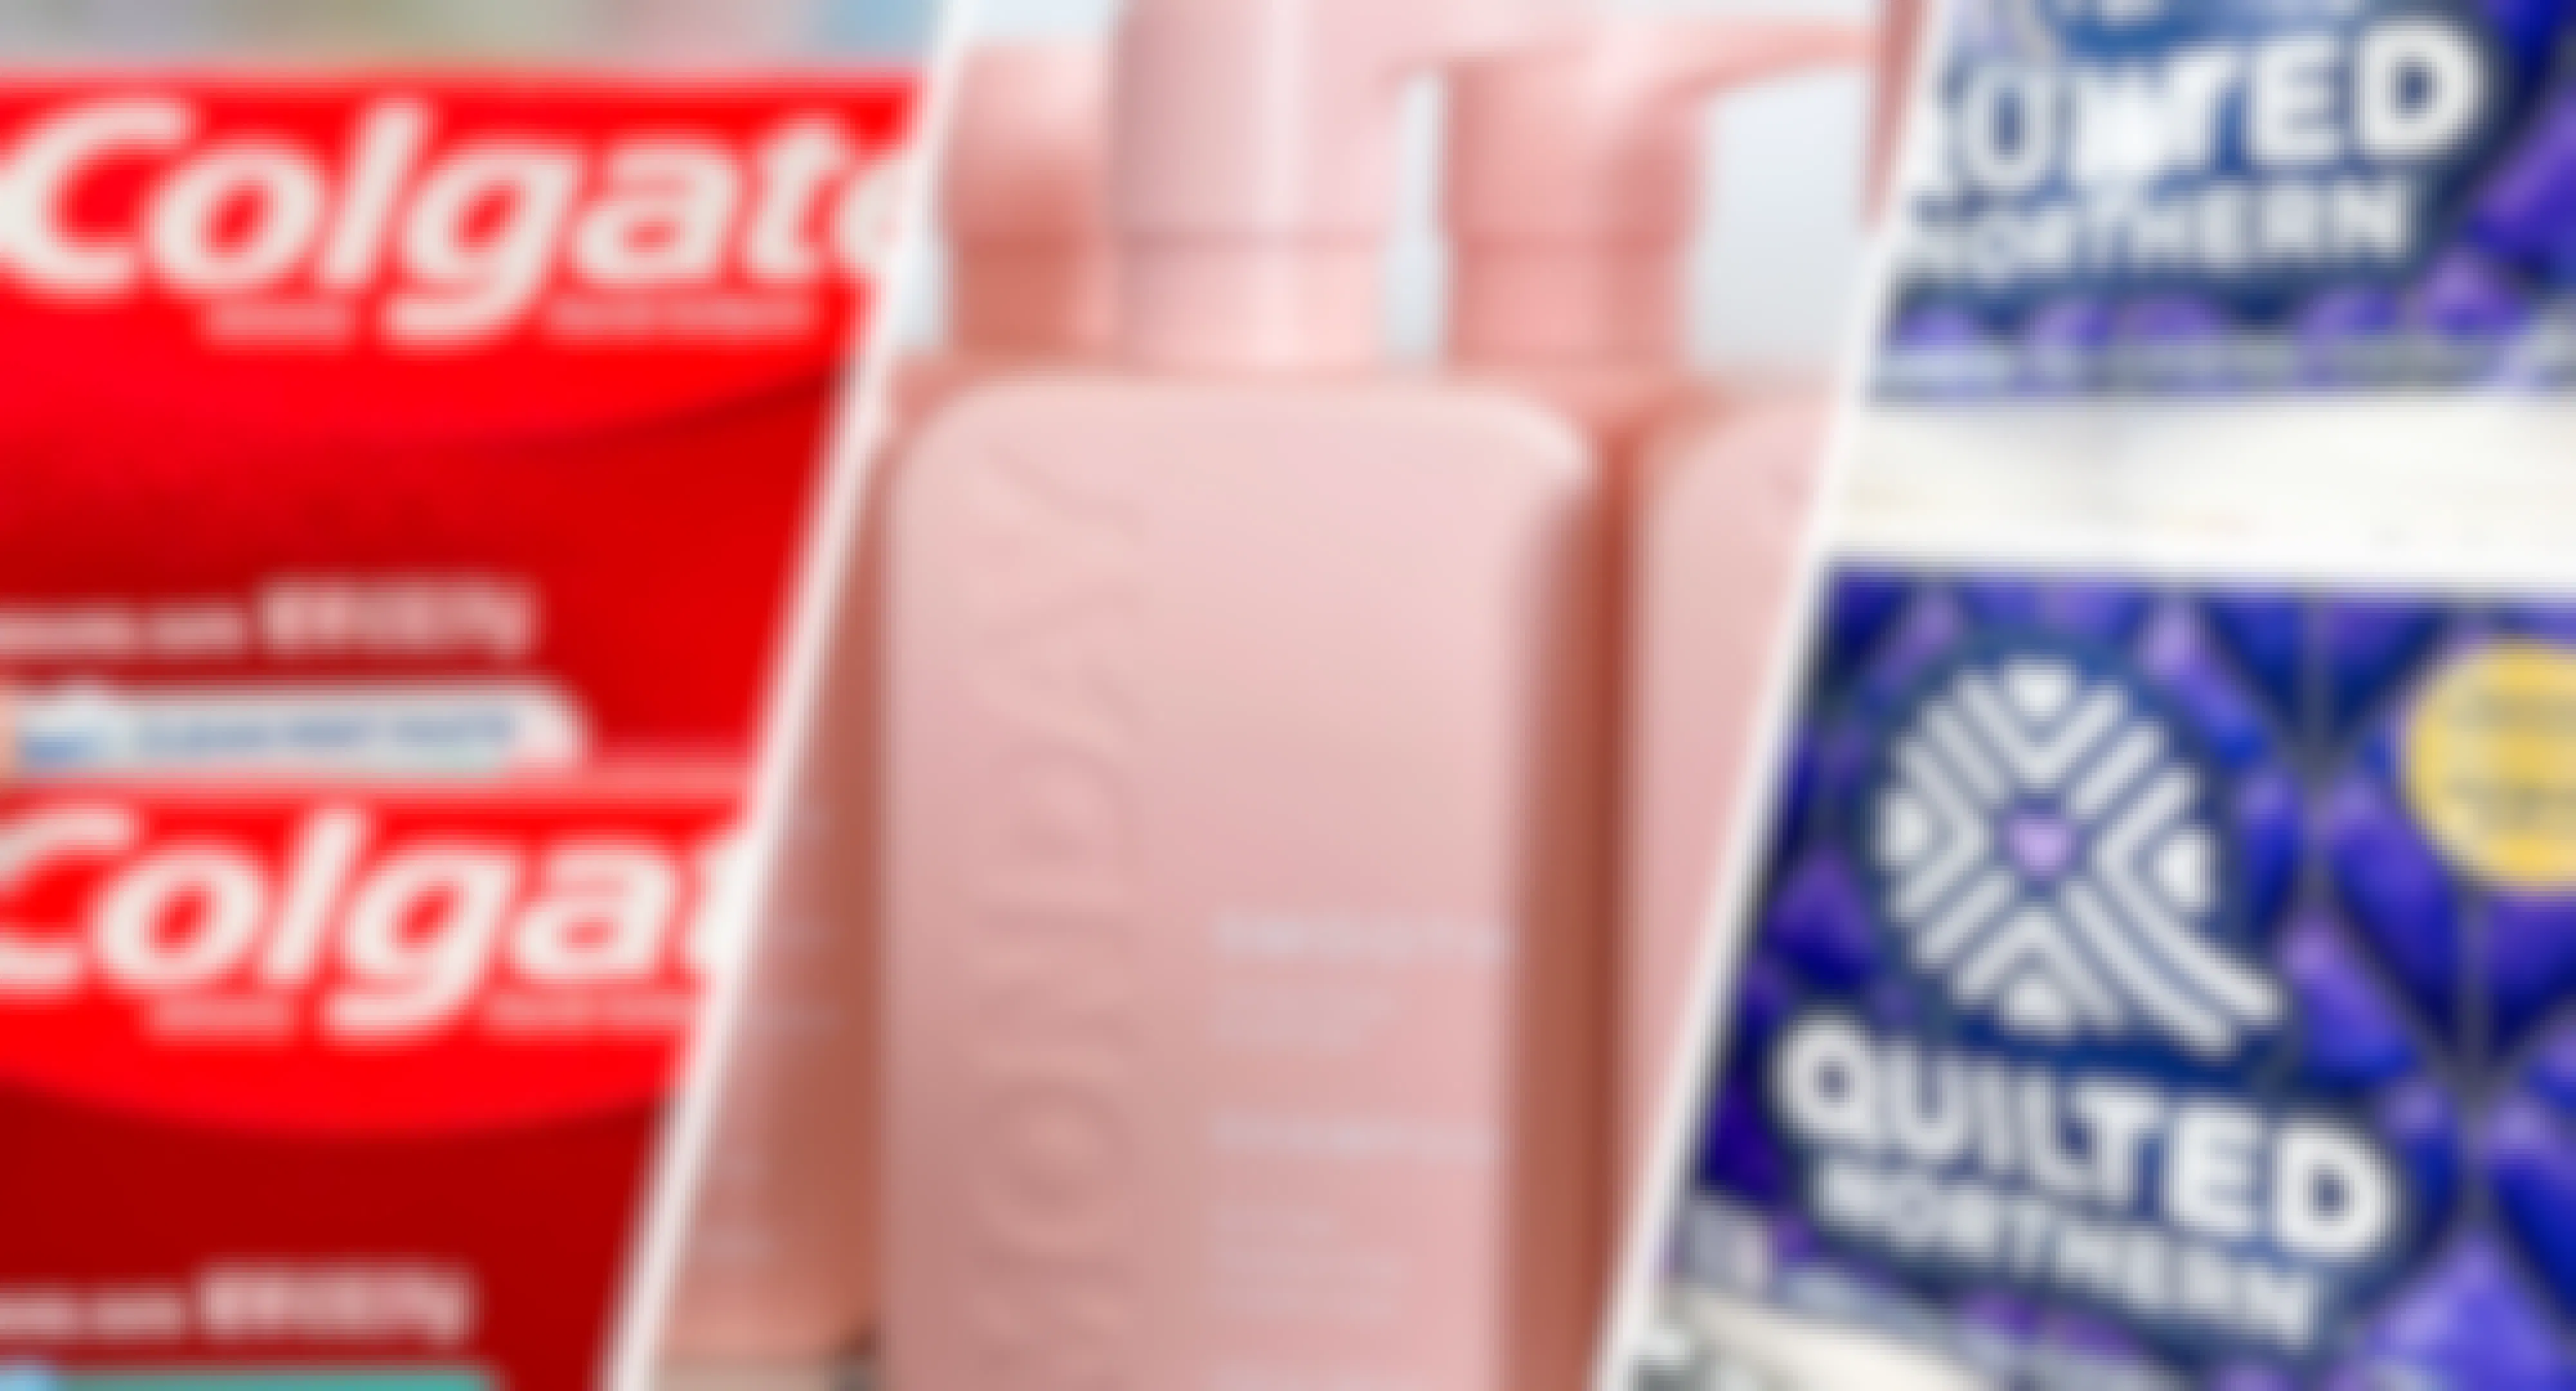 The Hottest All-Digital Couponing Deals: $3 Monday Haircare, $0.24 Colgate & More